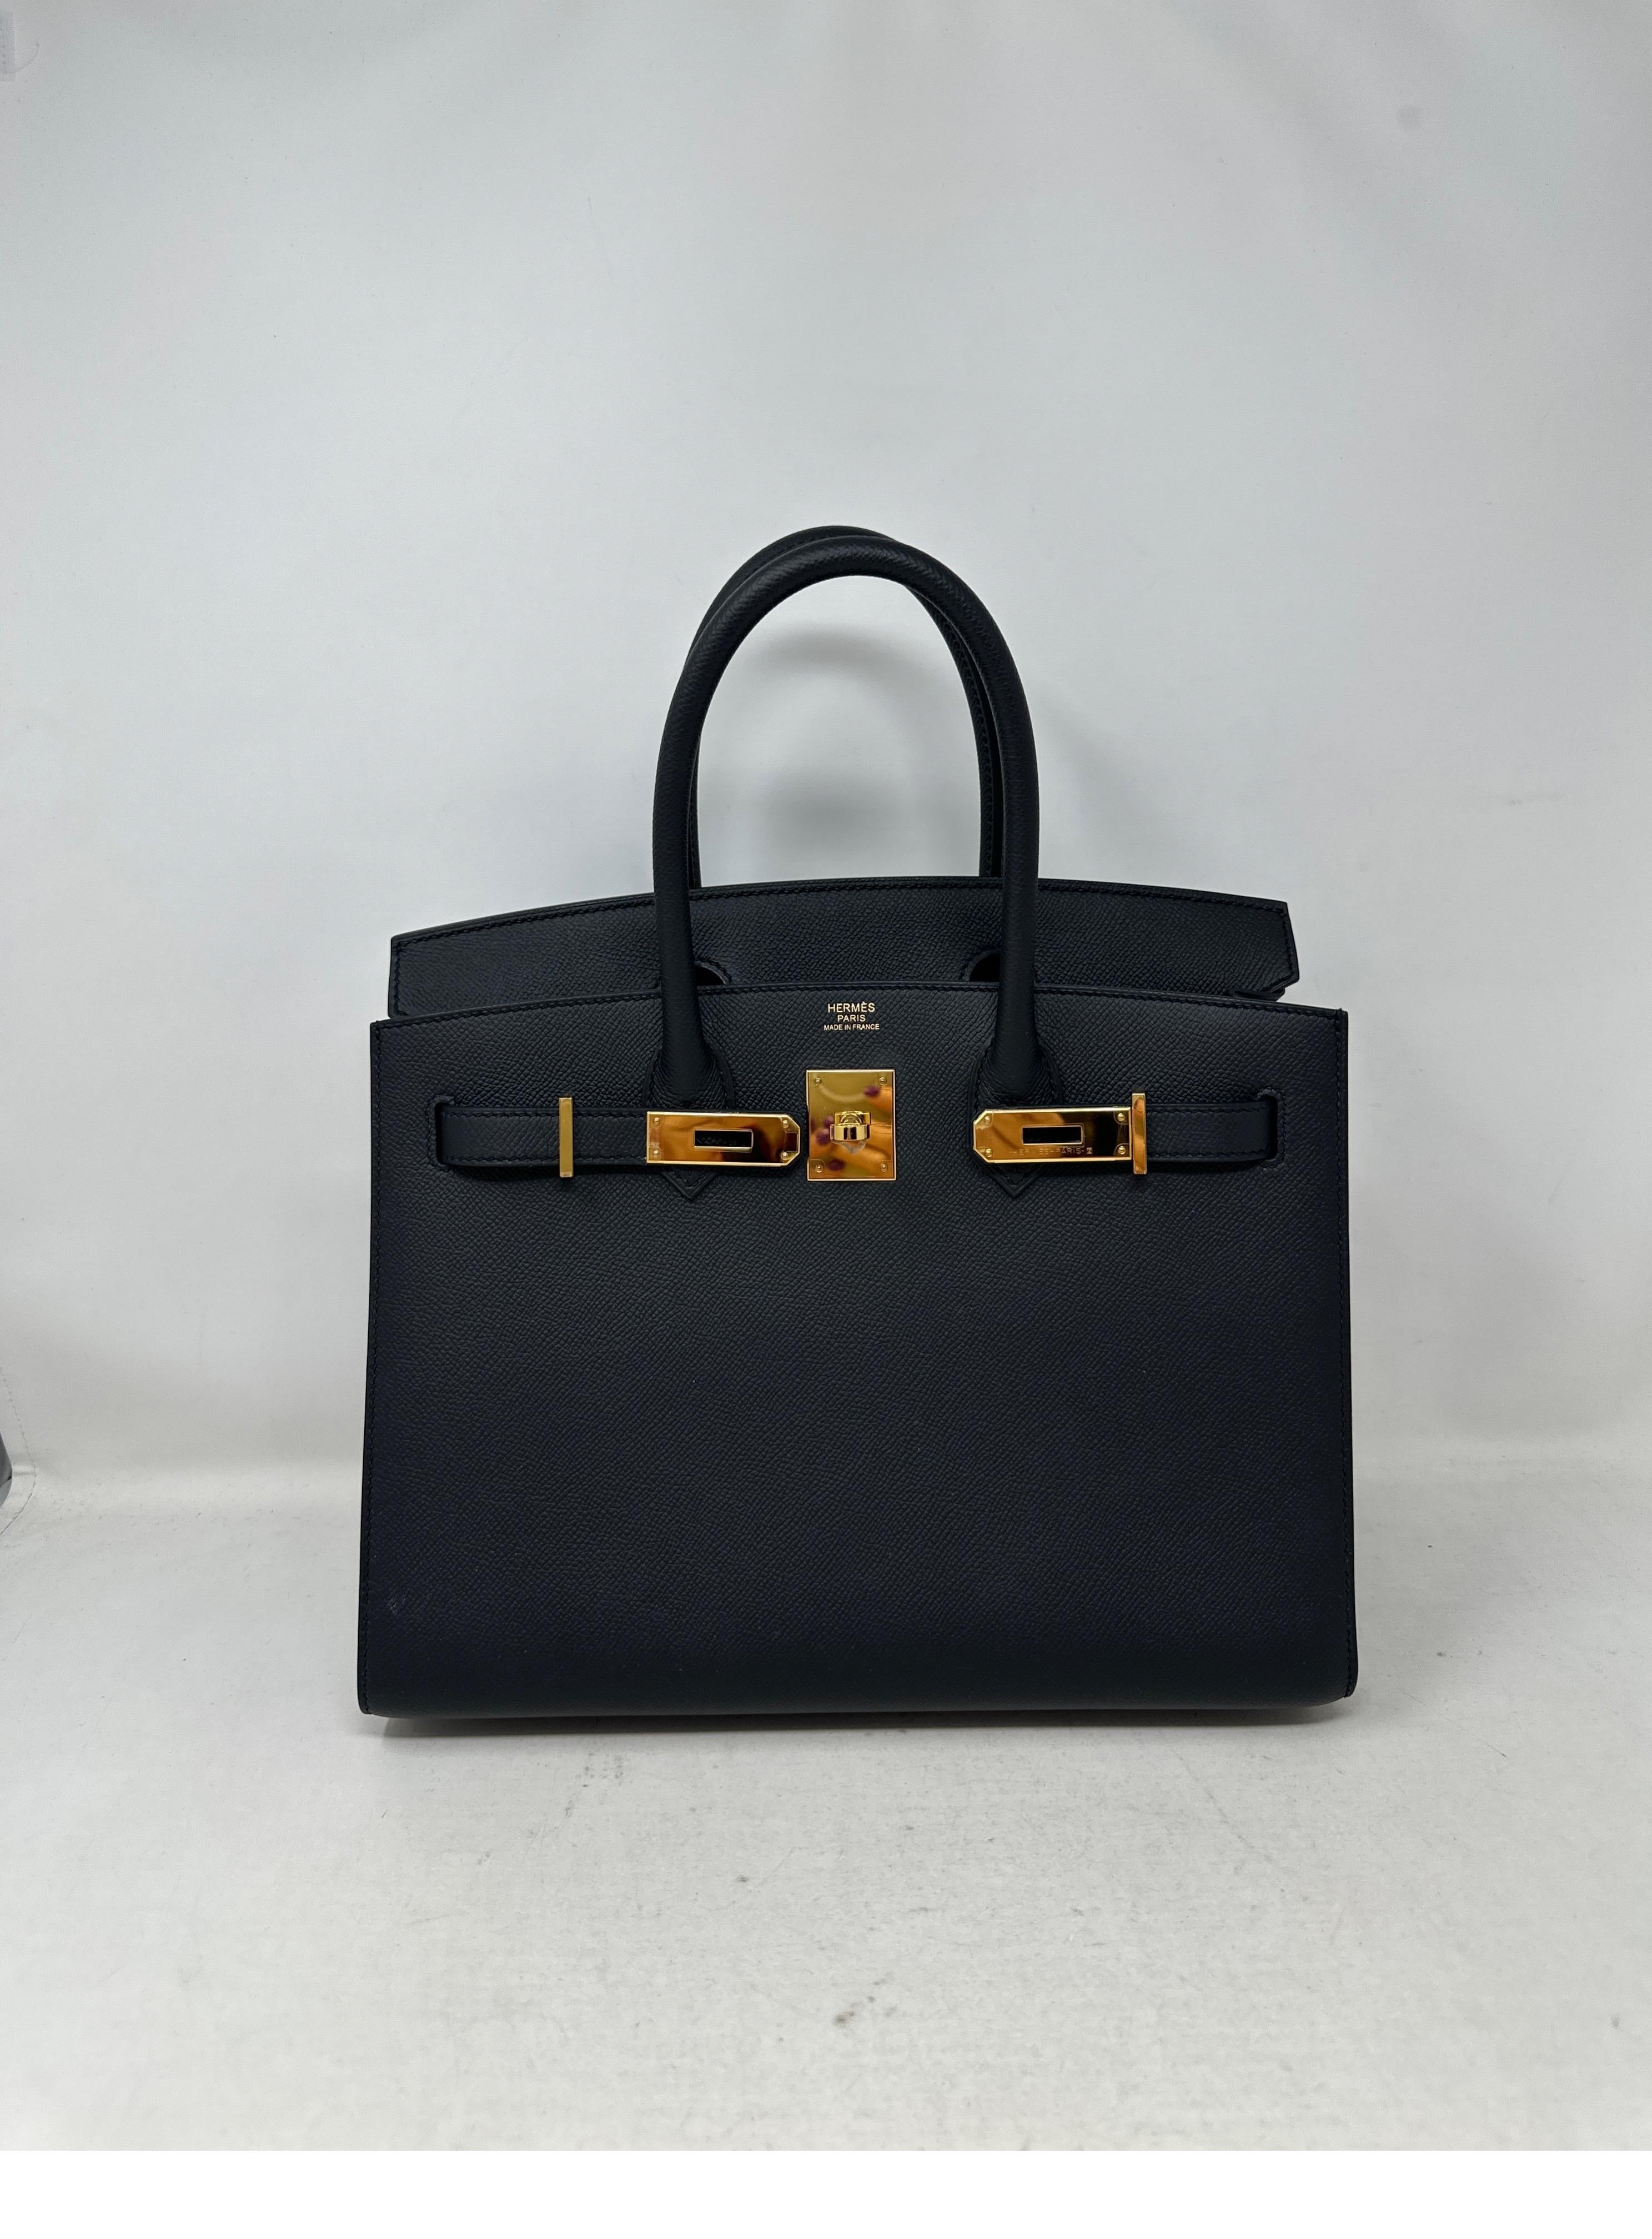 Hermes Black Sellier Birkin 30 Bag. New bag. Plastic still on hardware. Gold hardware. Sellier is high in demand. Great structured bag. Includes clochette, lock, keys, dust bag, receipt, and box. Full complete set. Guaranteed authentic. 